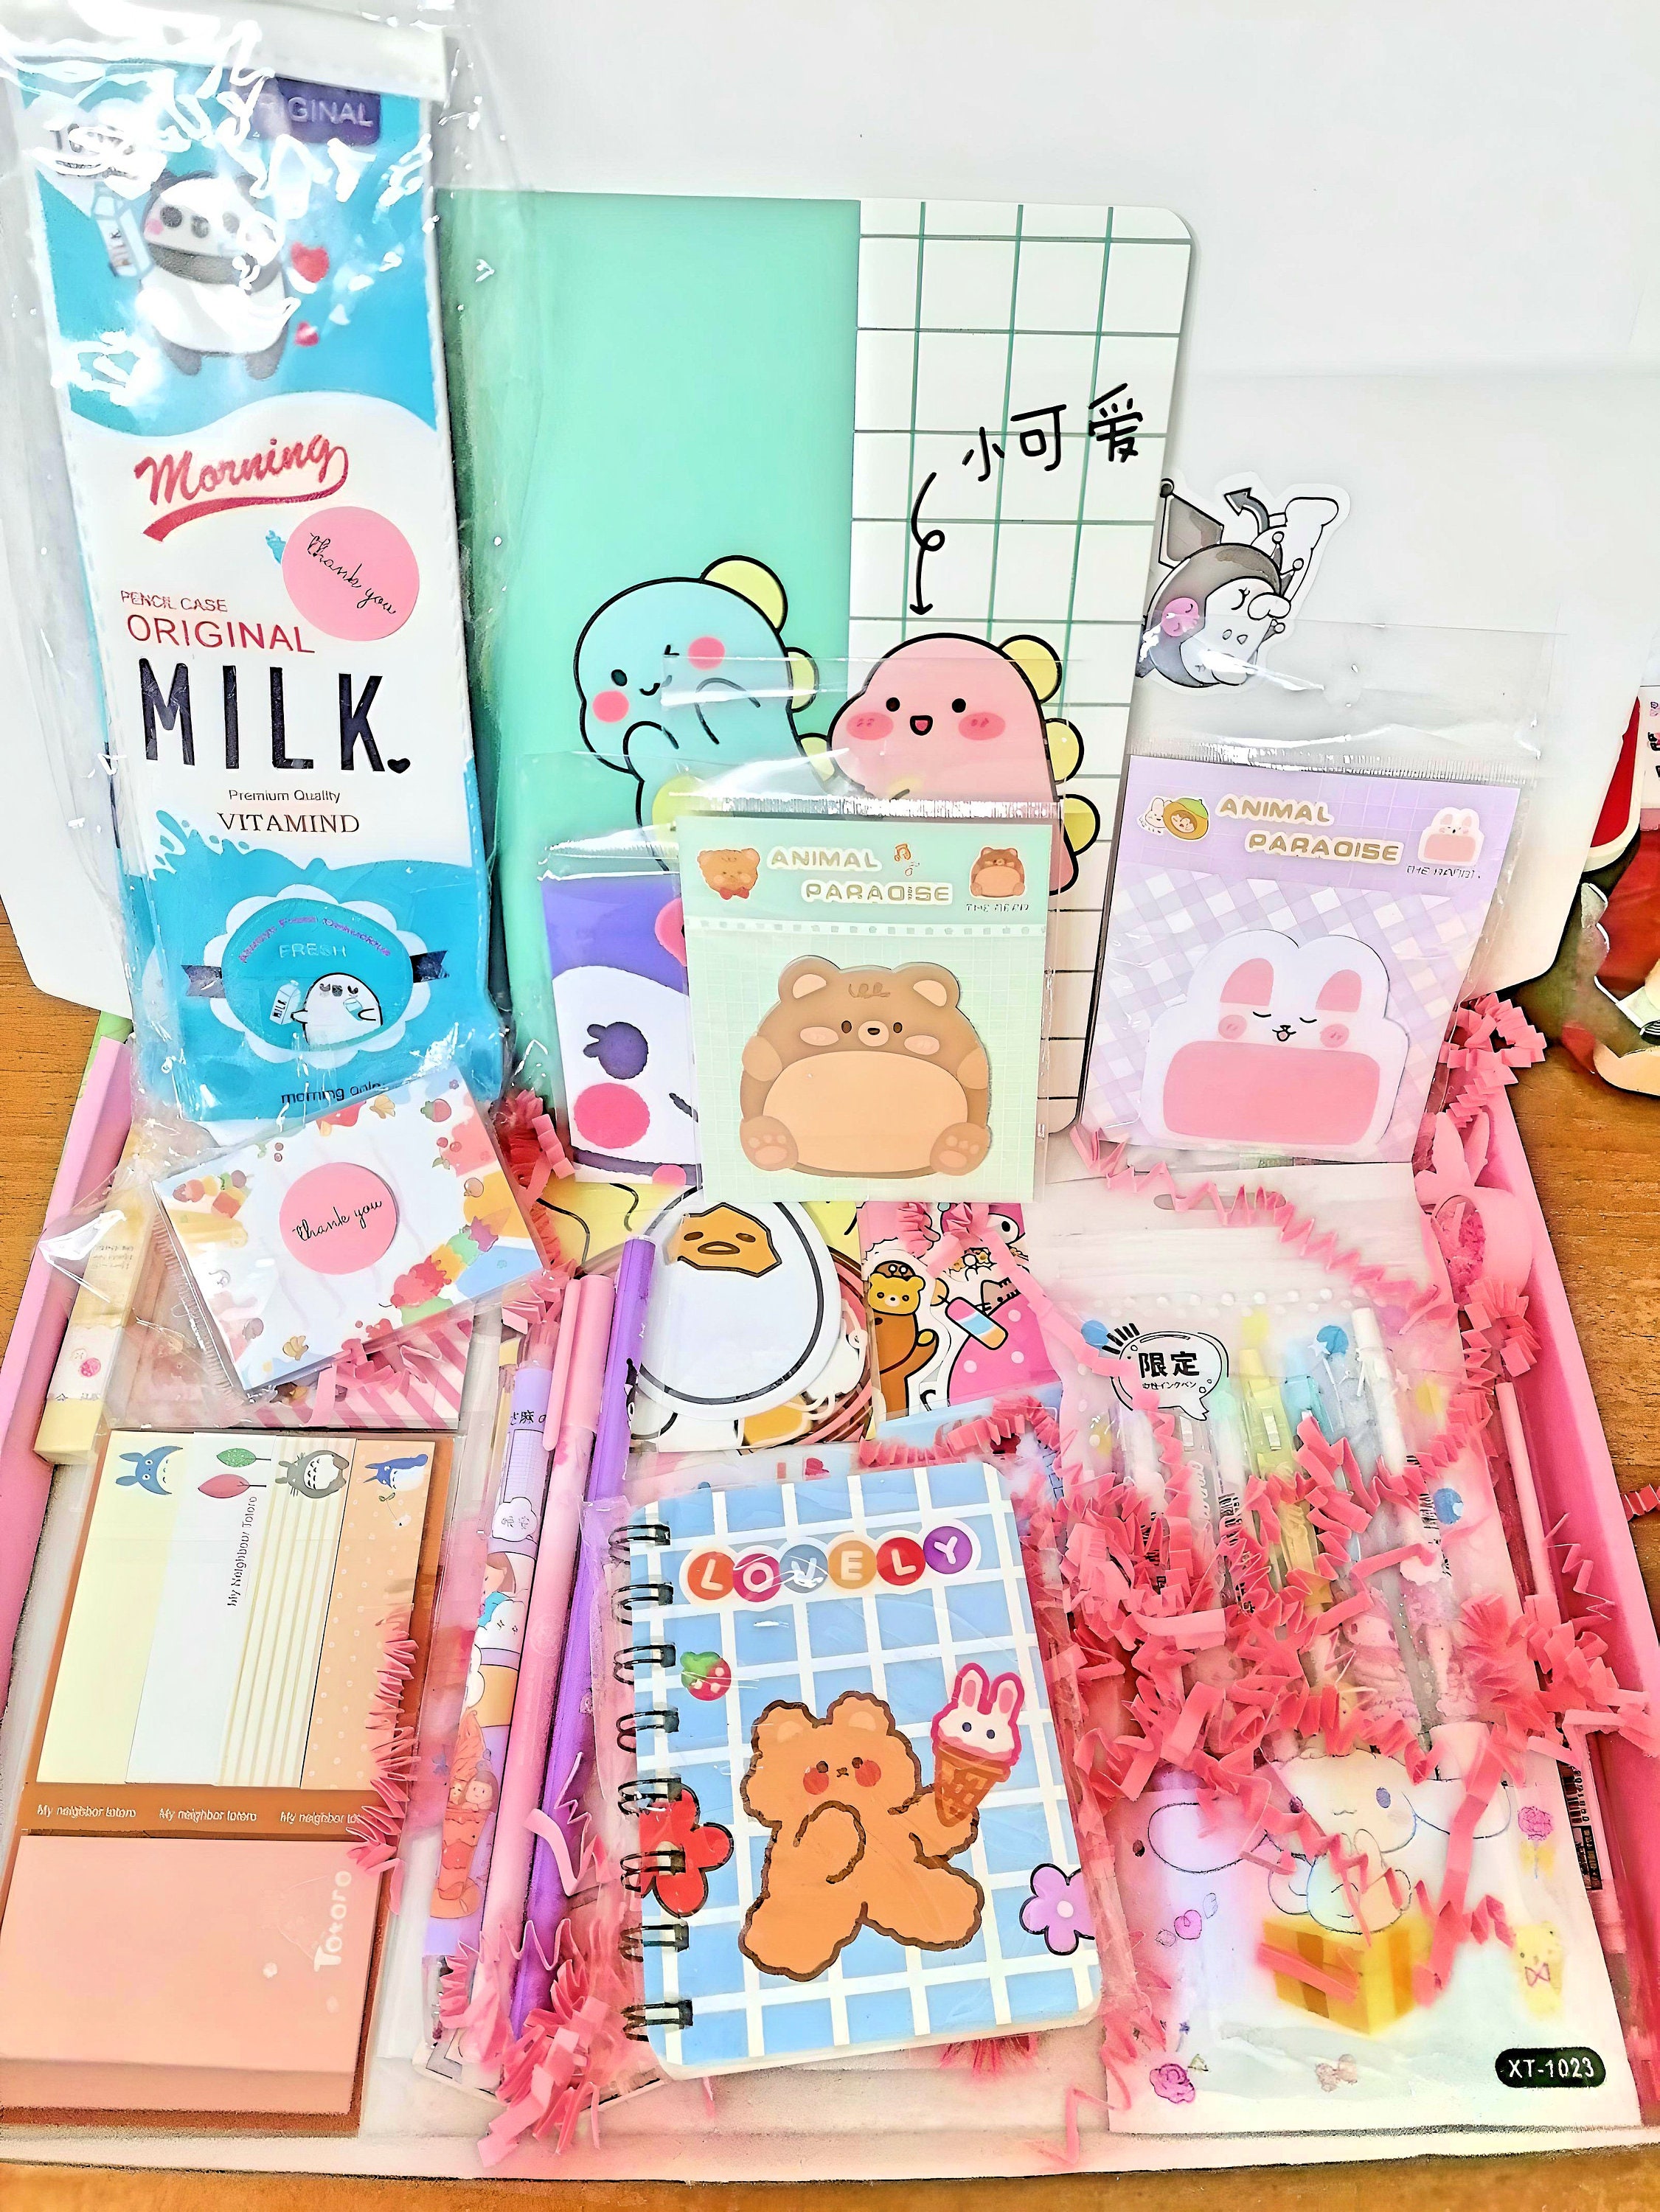 Cute stationery review by ohayoukitten!